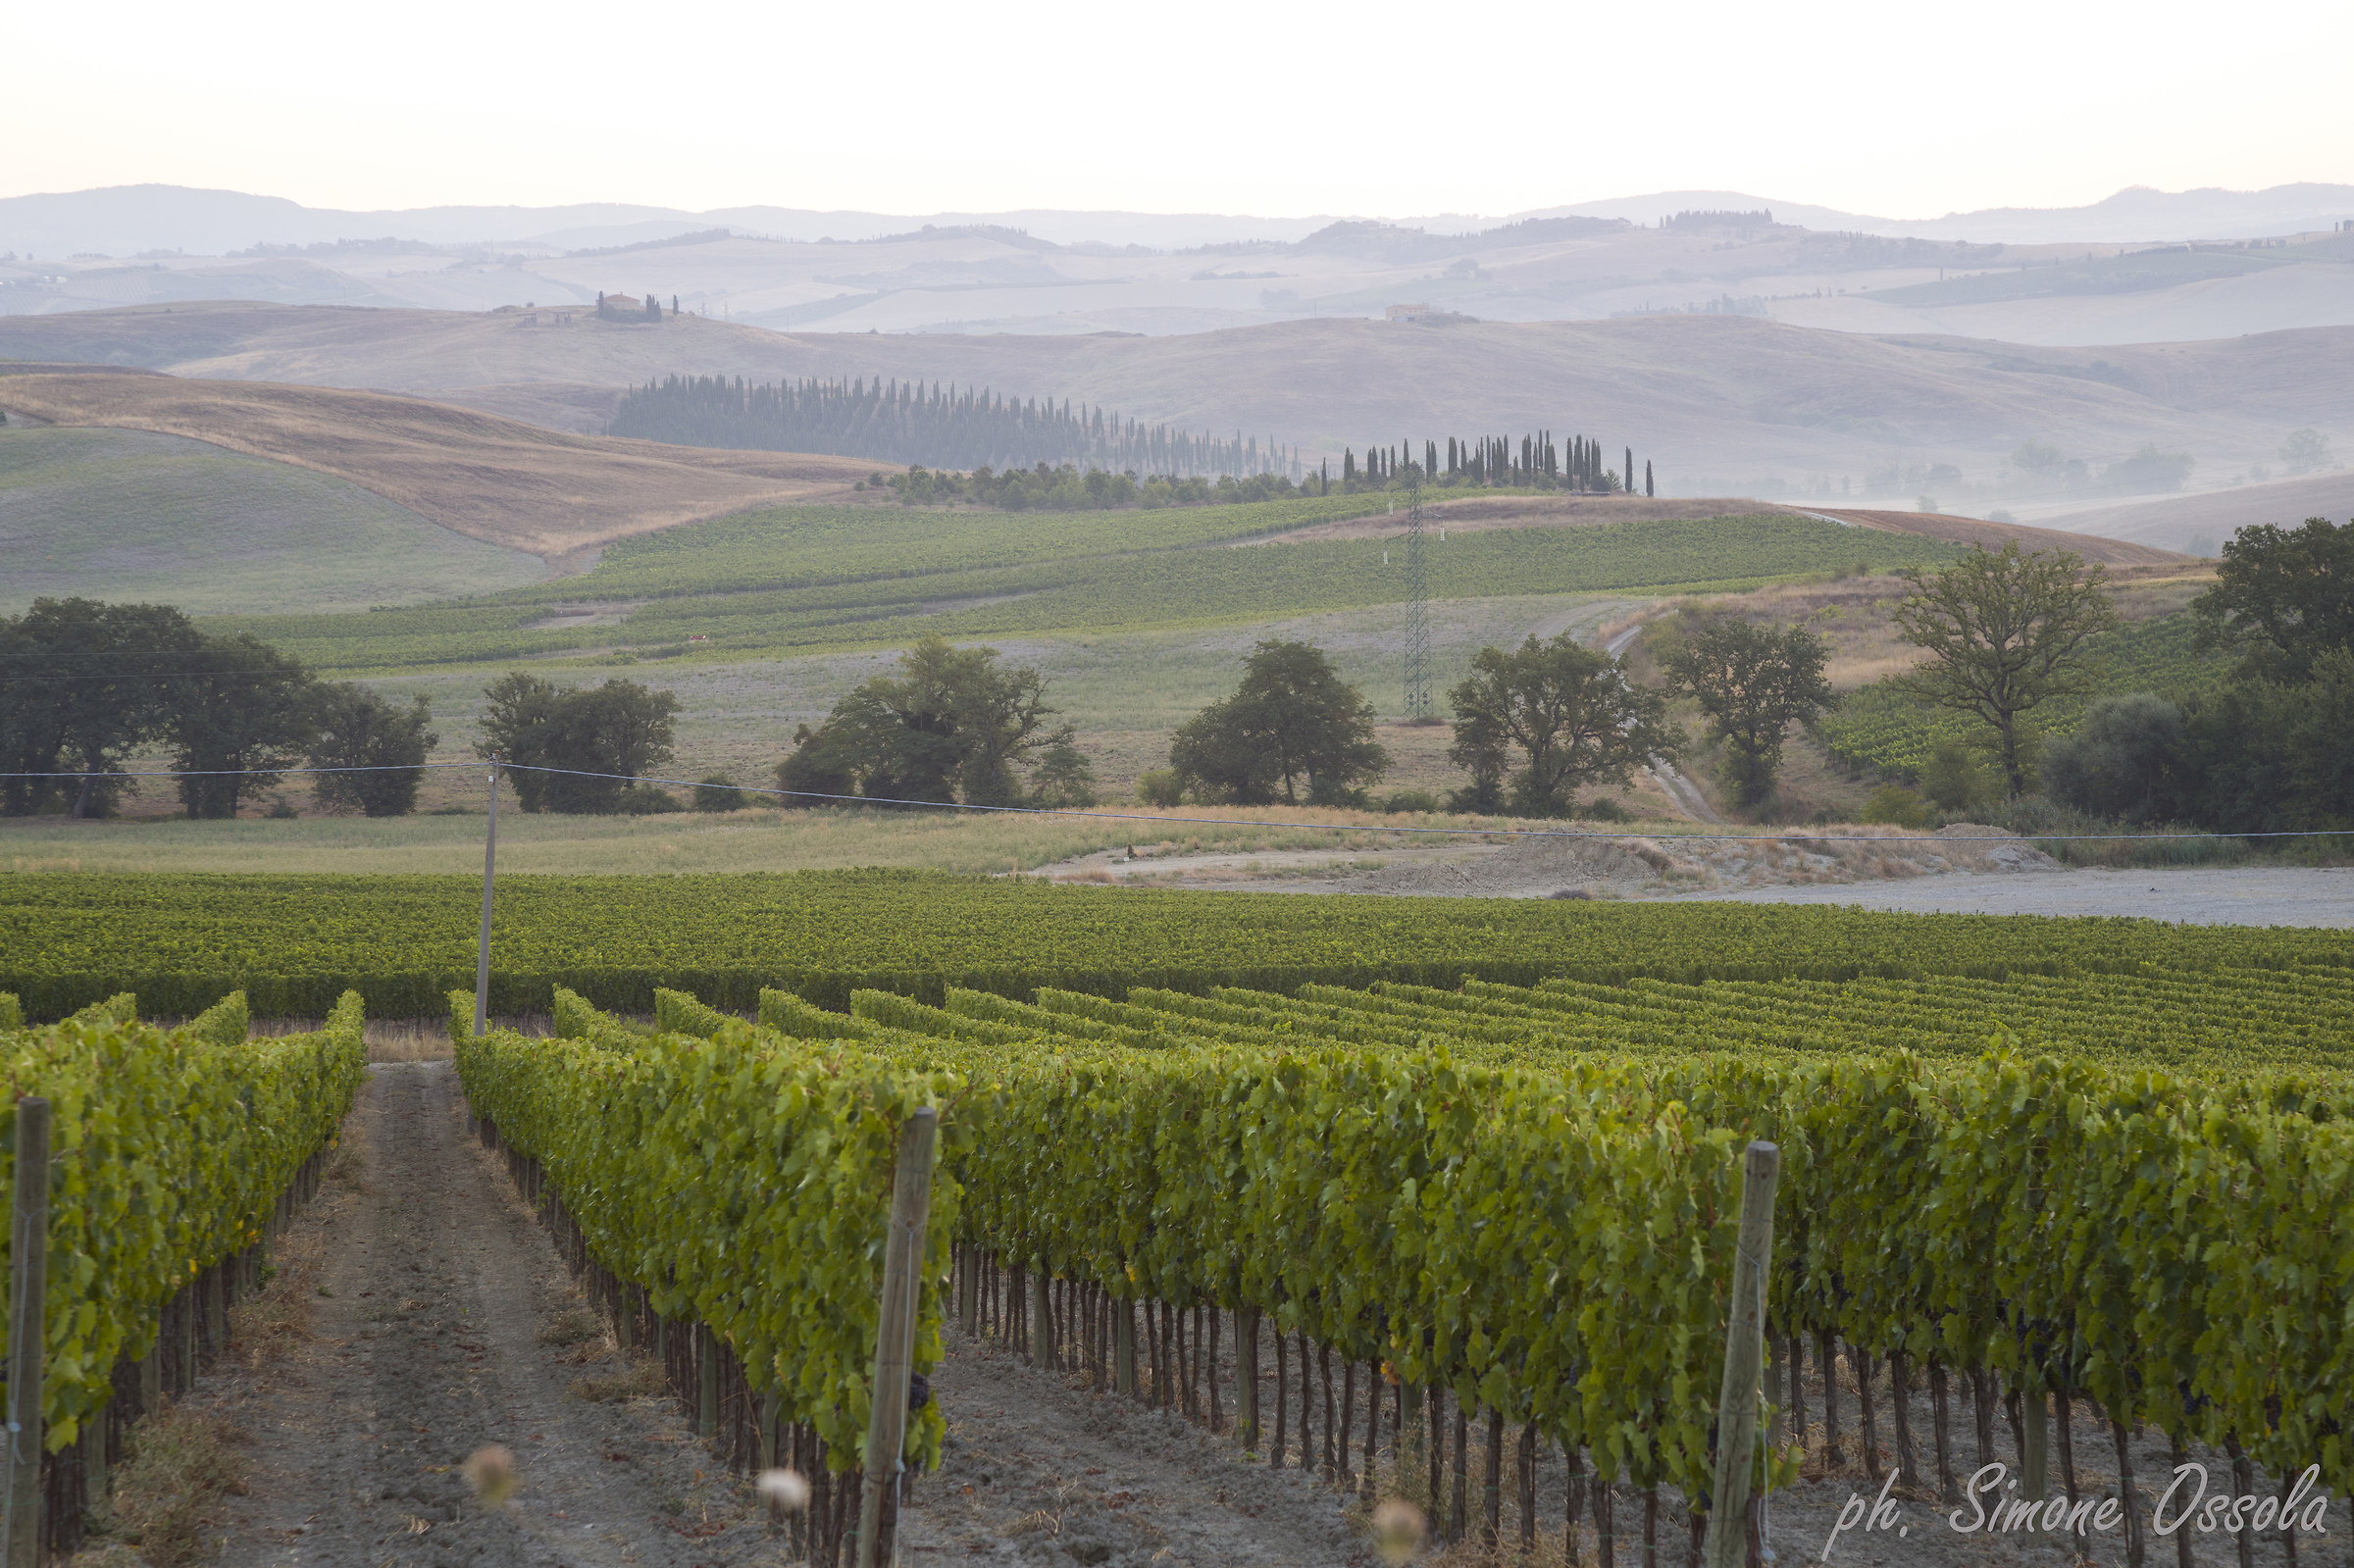 From the vineyards of Brunello to the Val d'orcia.......